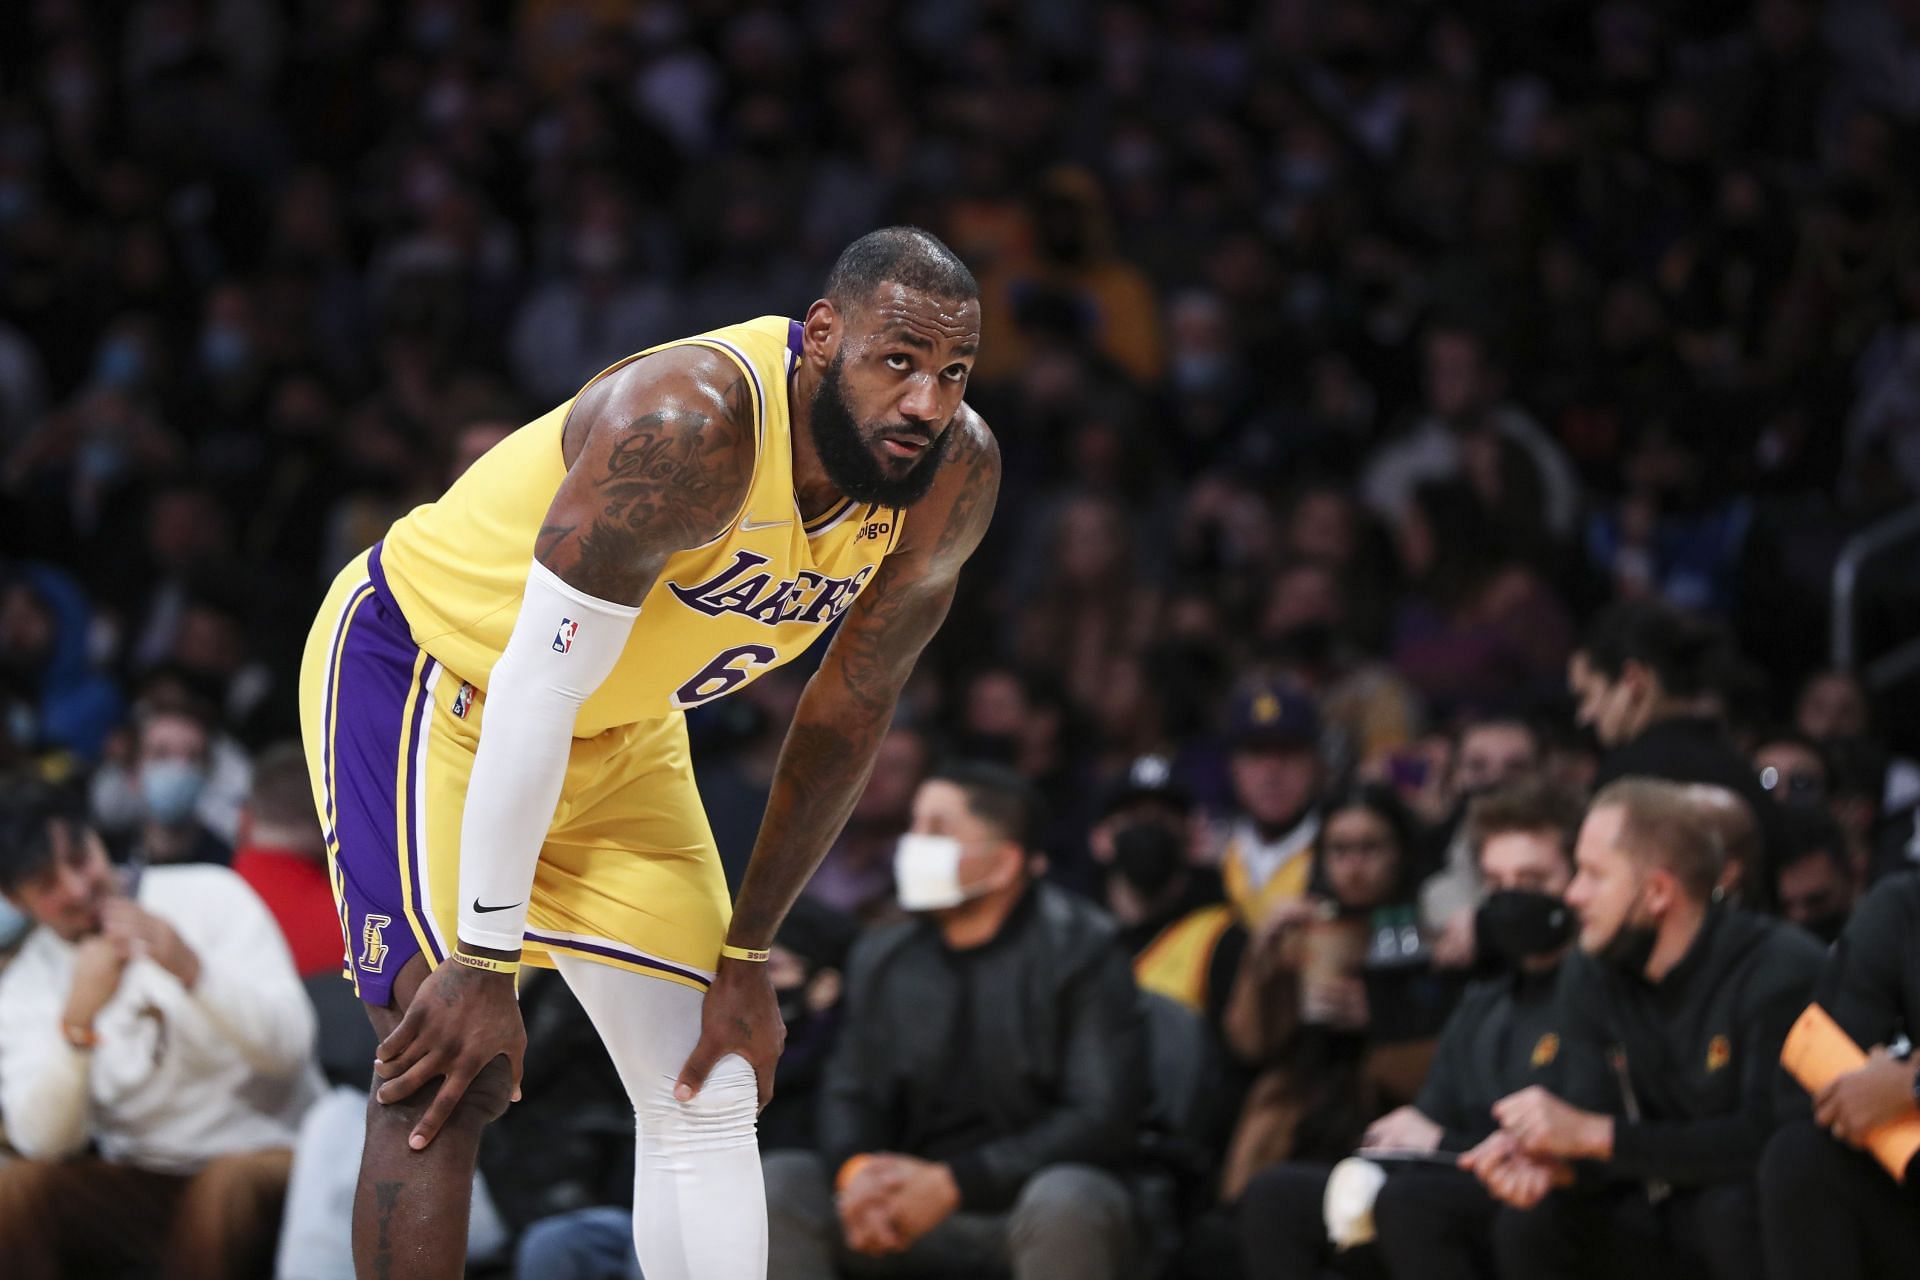 LA Lakers forward LeBron James has received backlash from a recent social media post.